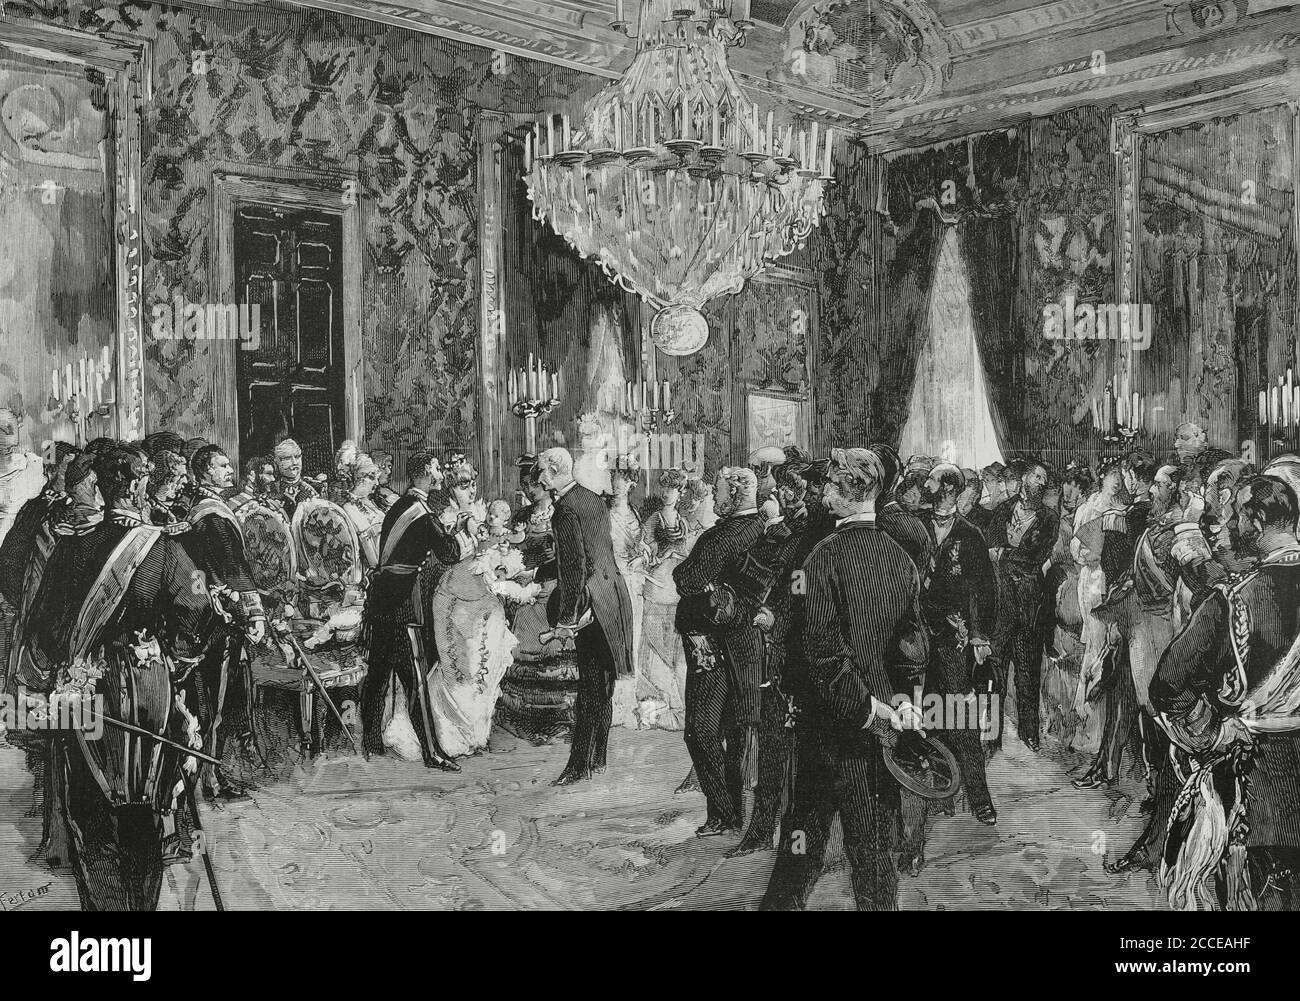 Spain, Madrid. Royal Palace. Ceremony of imposing the insignia of the Cross of the Victory to the Princess of Asturias, on the April 9, 1881. The King and Queen (Alfonso XII and Maria Cristina of Habsburg-Lorraine), the Infanta of Spain and Princess of Asturias Maria de las Mercedes, in the arms of their august mother, and infantas Isabel, Paz and Elulalia are present. Life drawing by Ferrant. Engraving by Bernardo Rico (1825-1894). La Ilustracion Española y Americana, 1881. Stock Photo